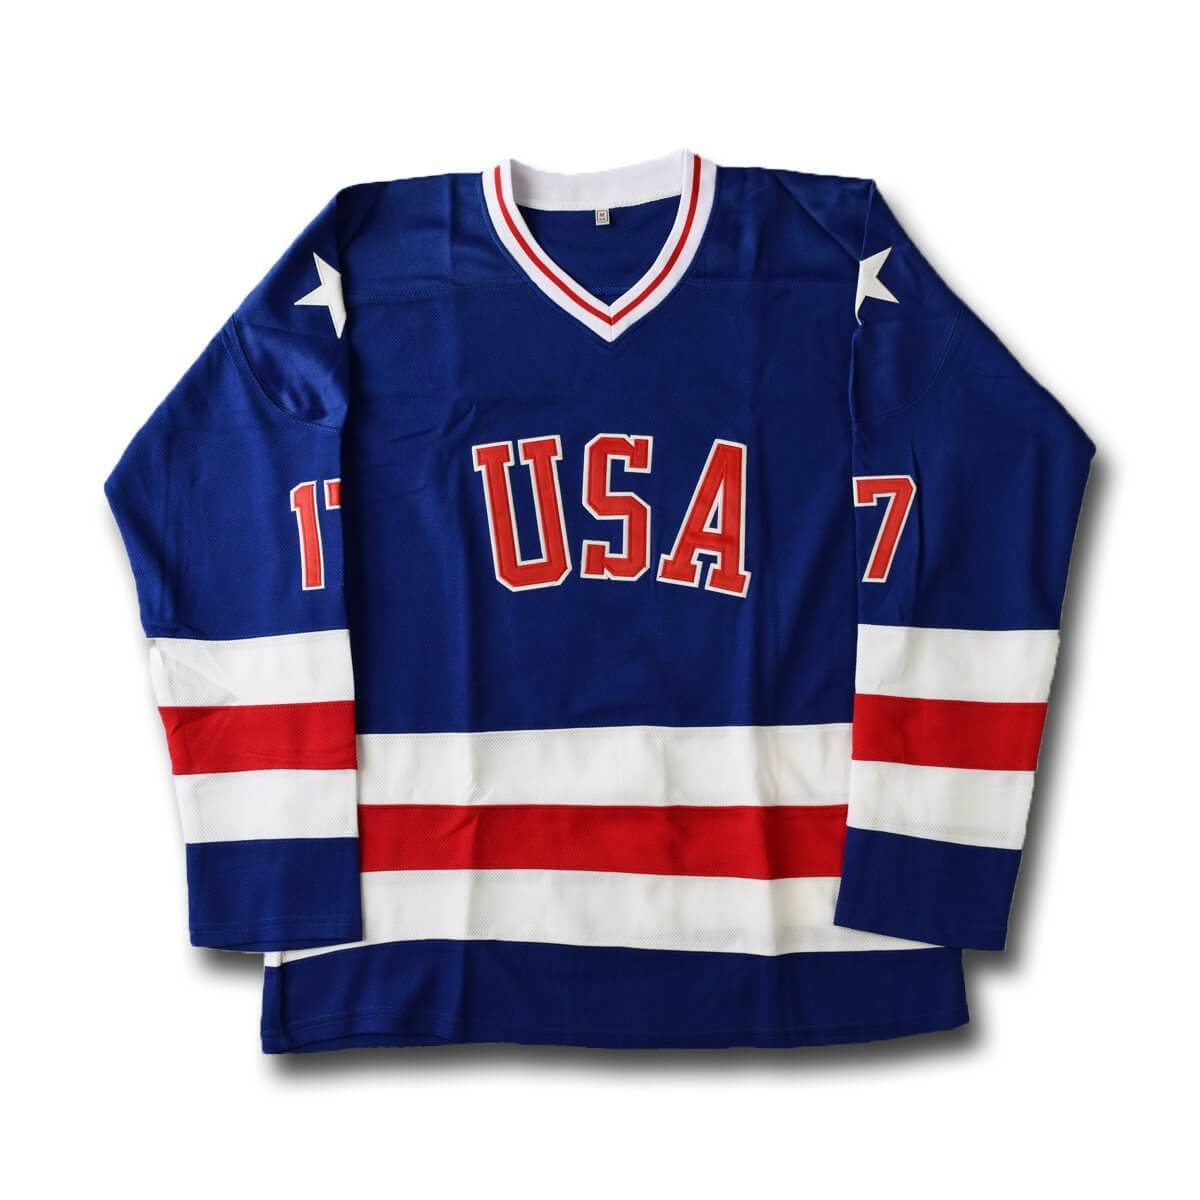 Lowsport USA Hockey Miracle on Ice Replica Performance Jersey - White